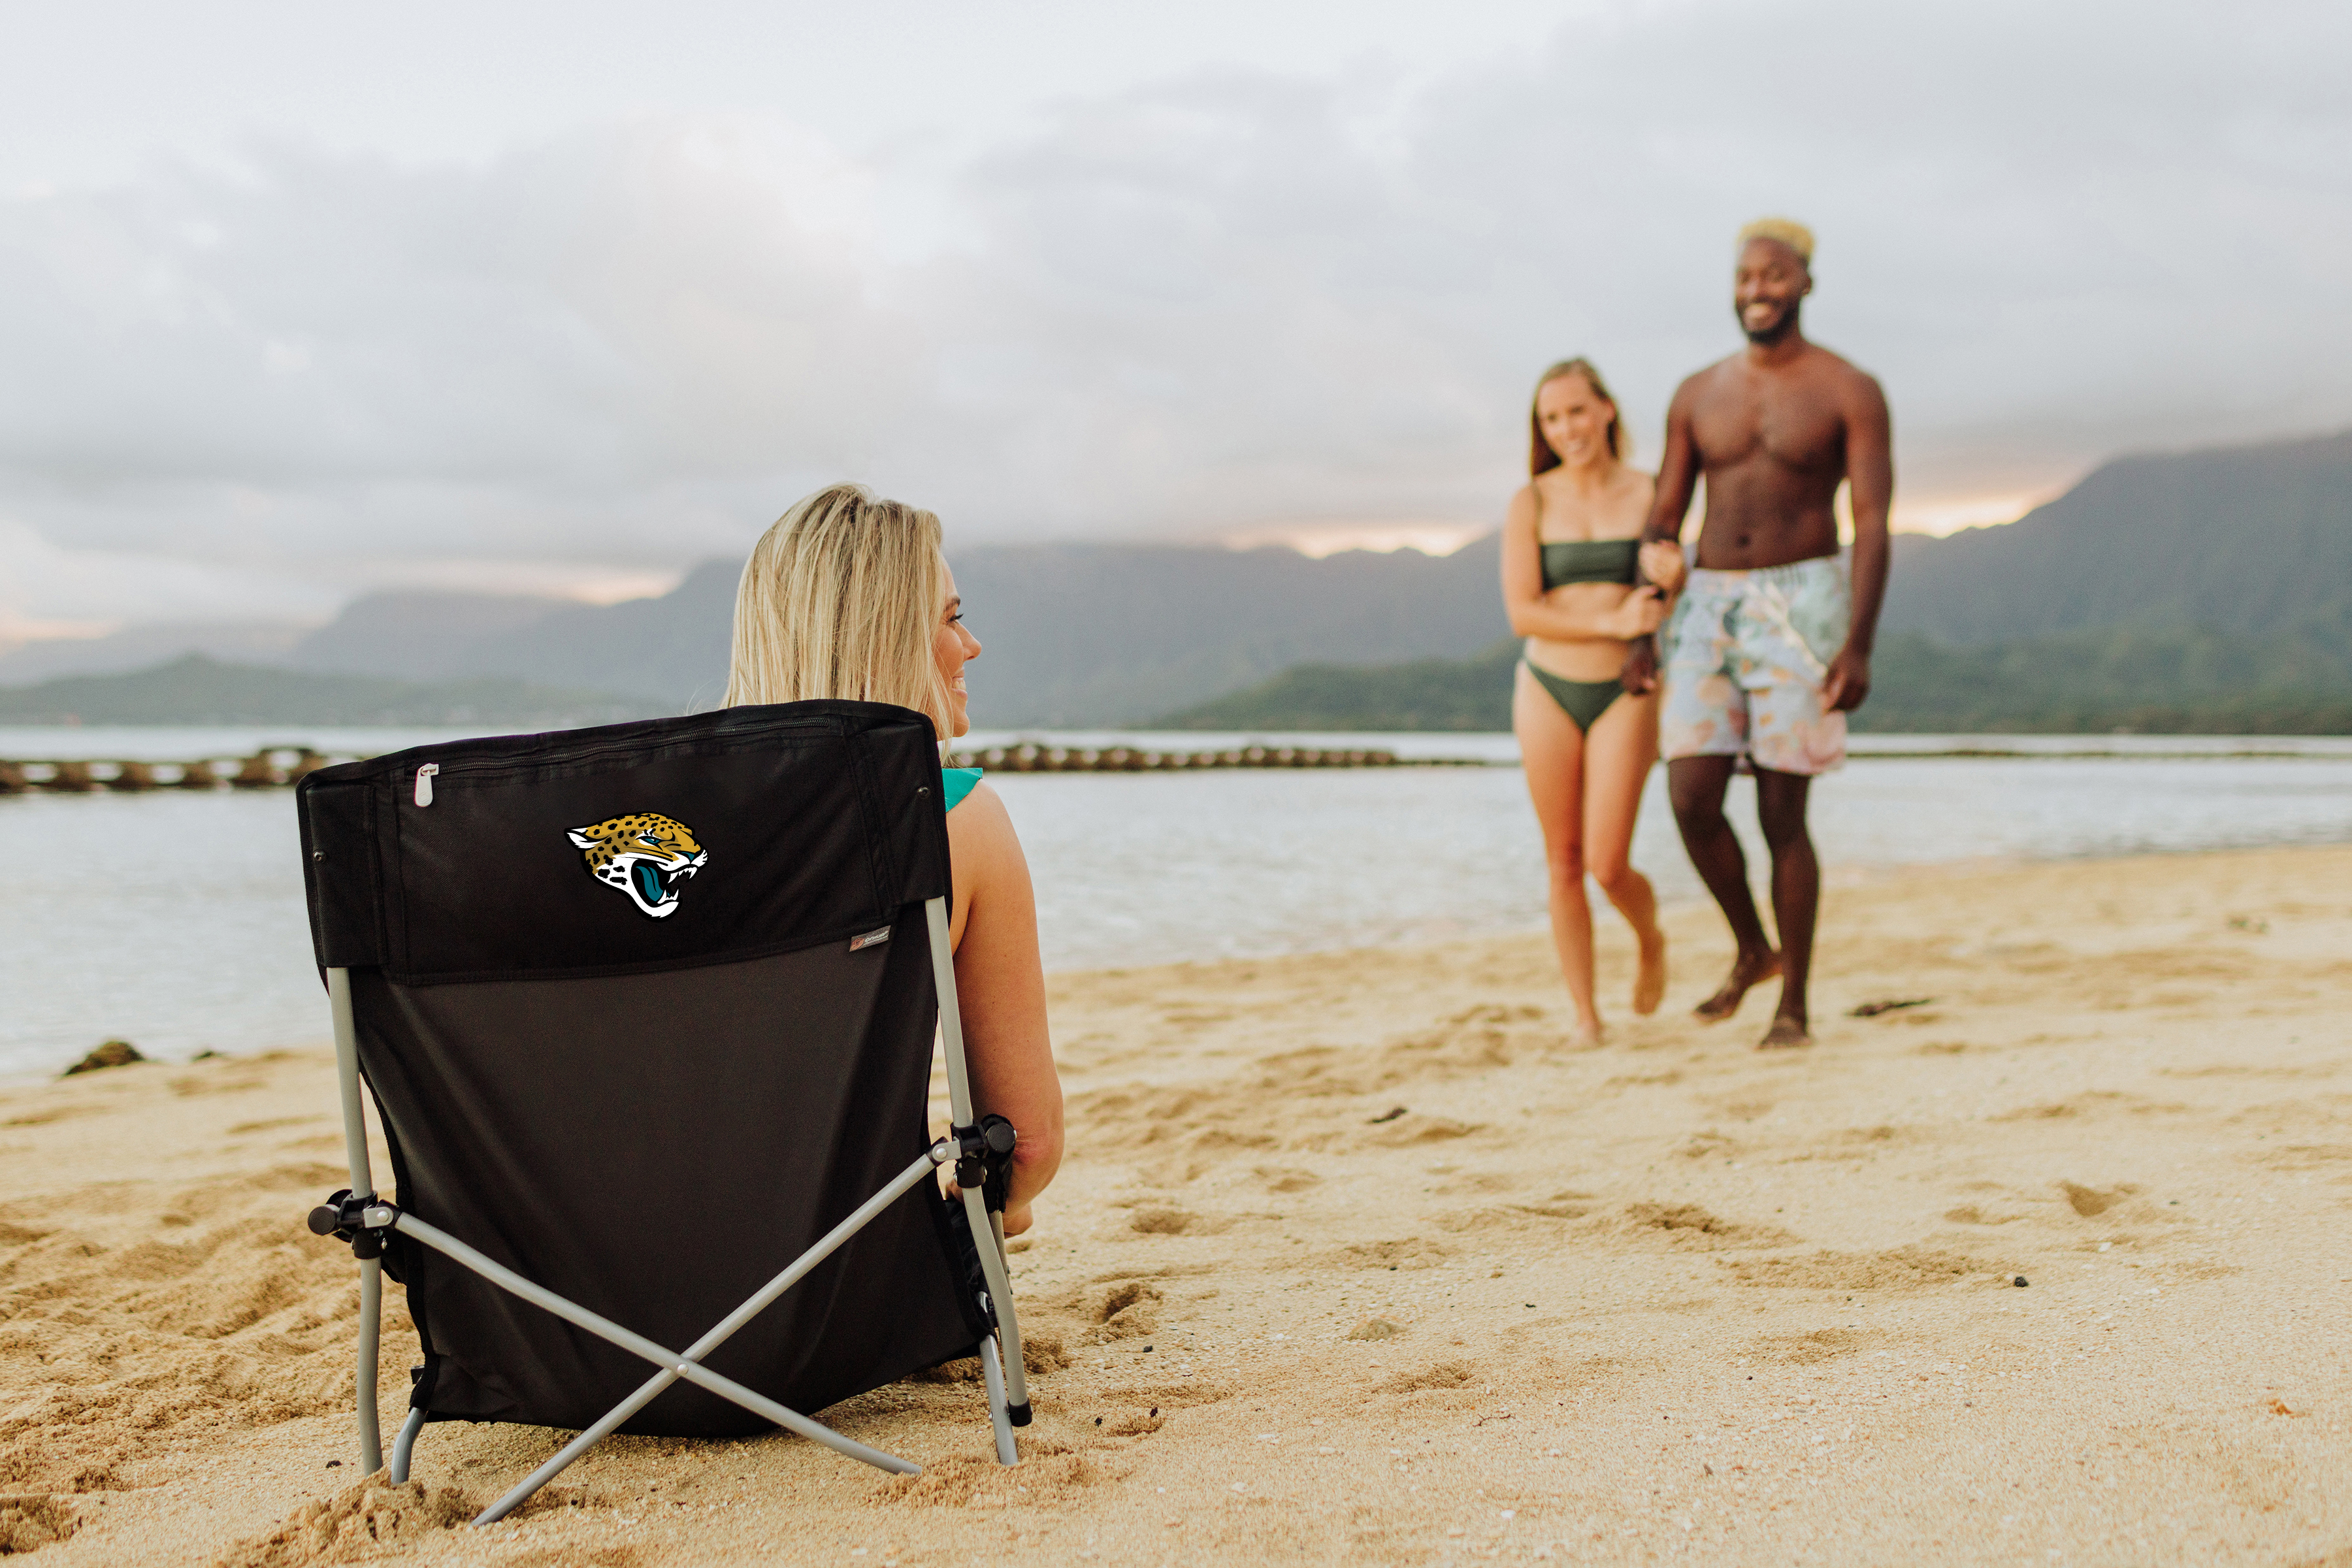 Jacksonville Jaguars - Tranquility Beach Chair with Carry Bag